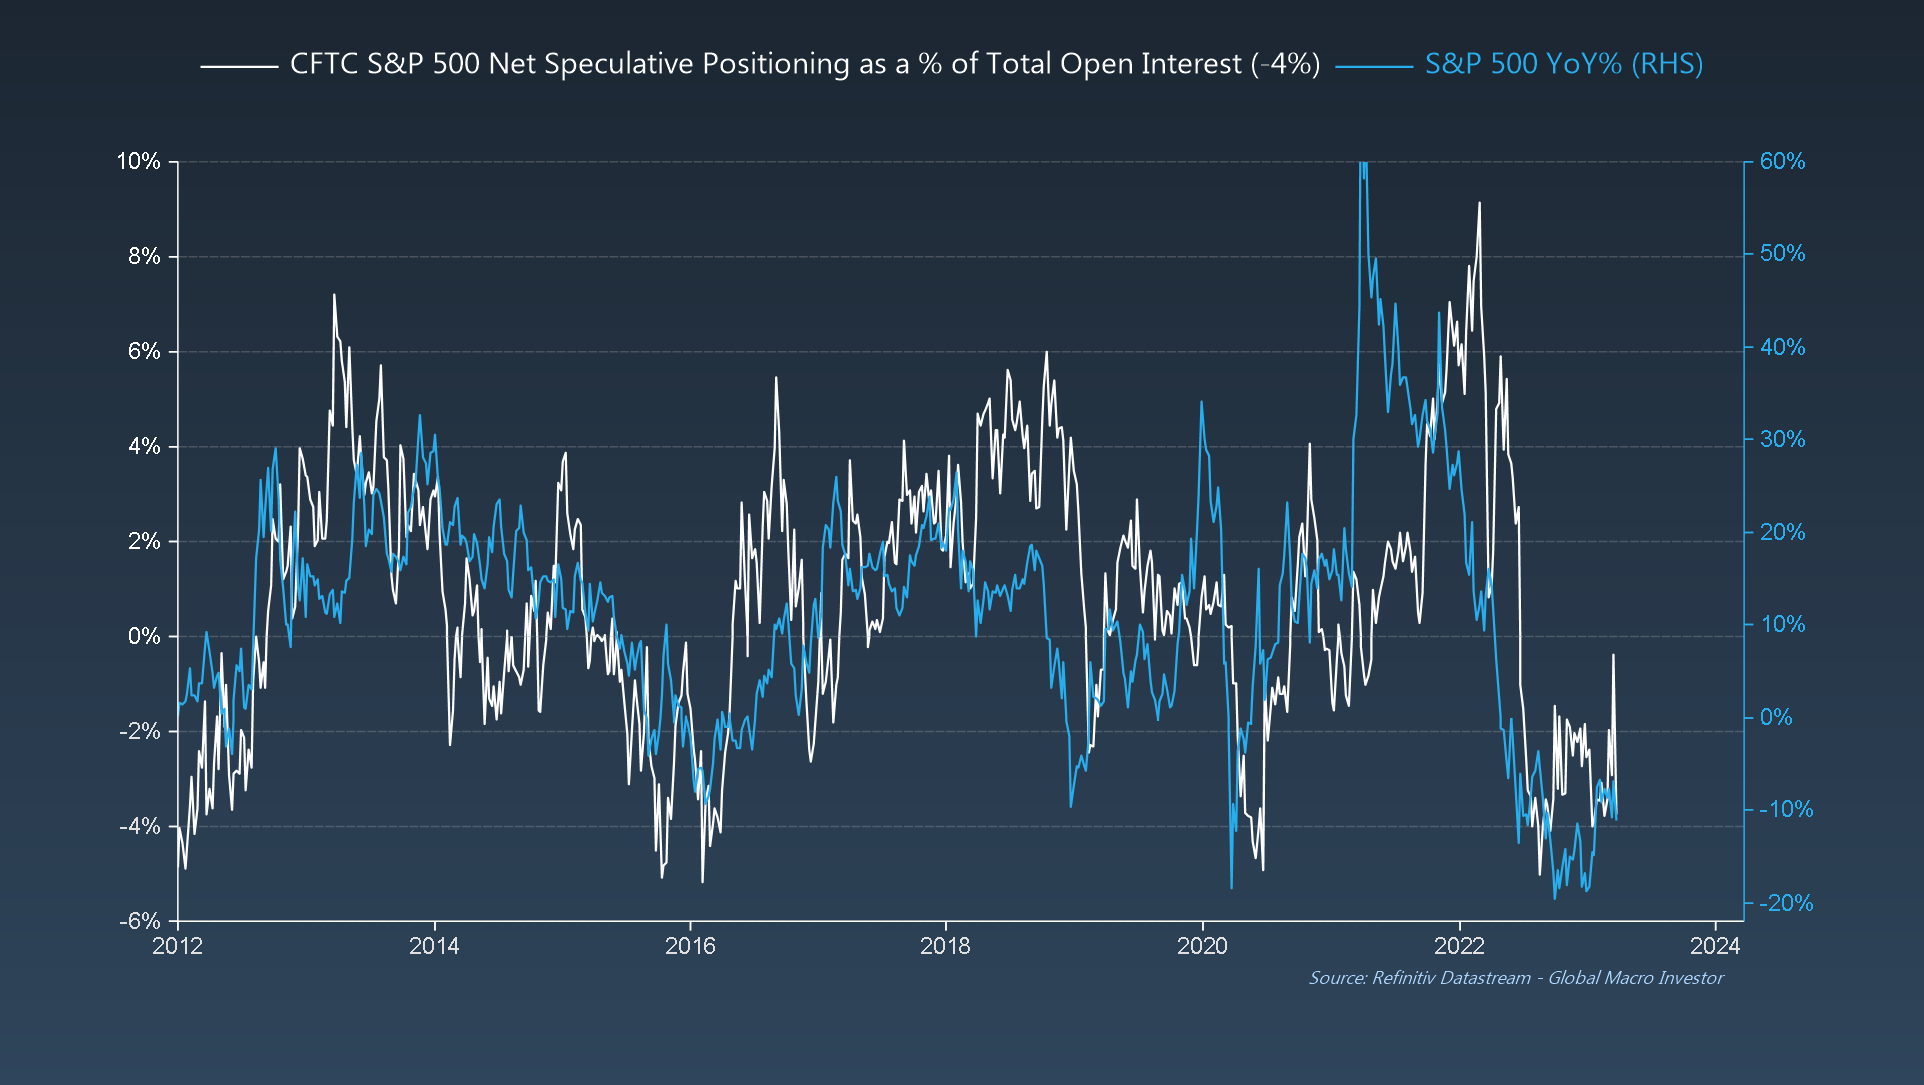 CFTC S&P 500 Net Speculative Positioning vs. S&P 500 YoY%